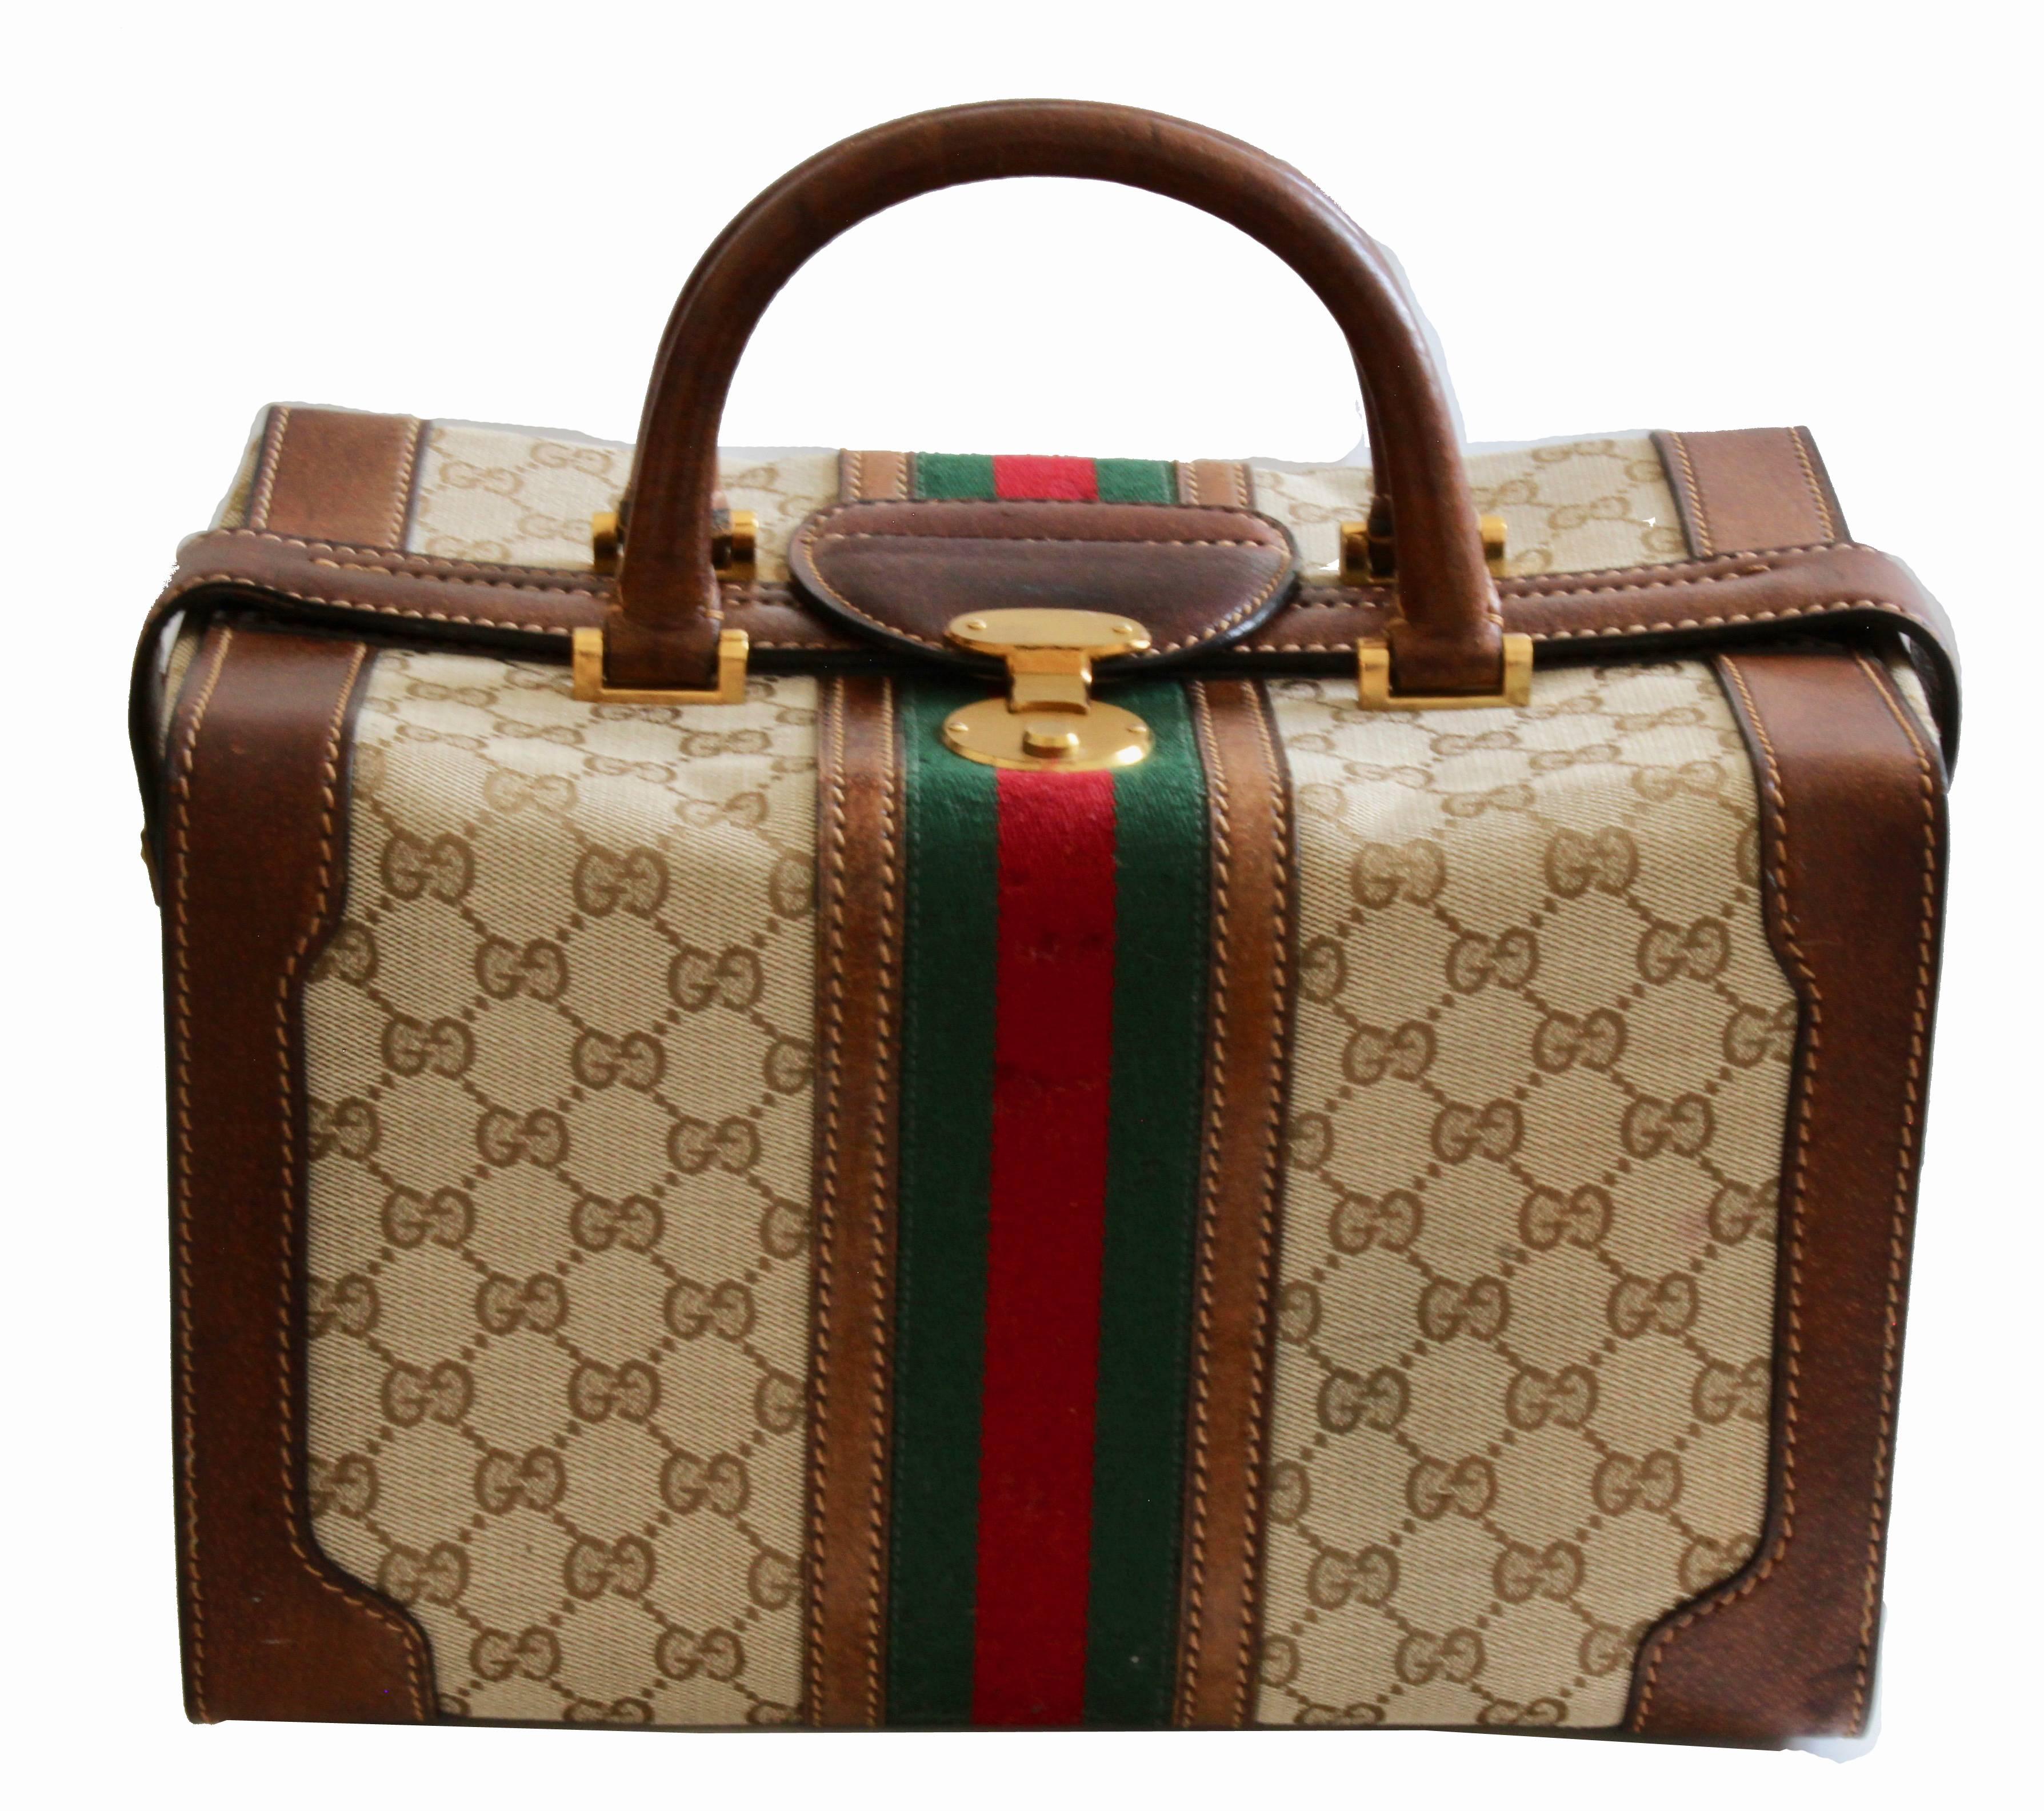 This fabulous train case was made by Gucci, most likely in the 1970s.  Made from their brown GG logo canvas with webbing, it opens doctor bag style with three latches.  Inside is fully lined with one zipper pocket and an adjustable bottle holder